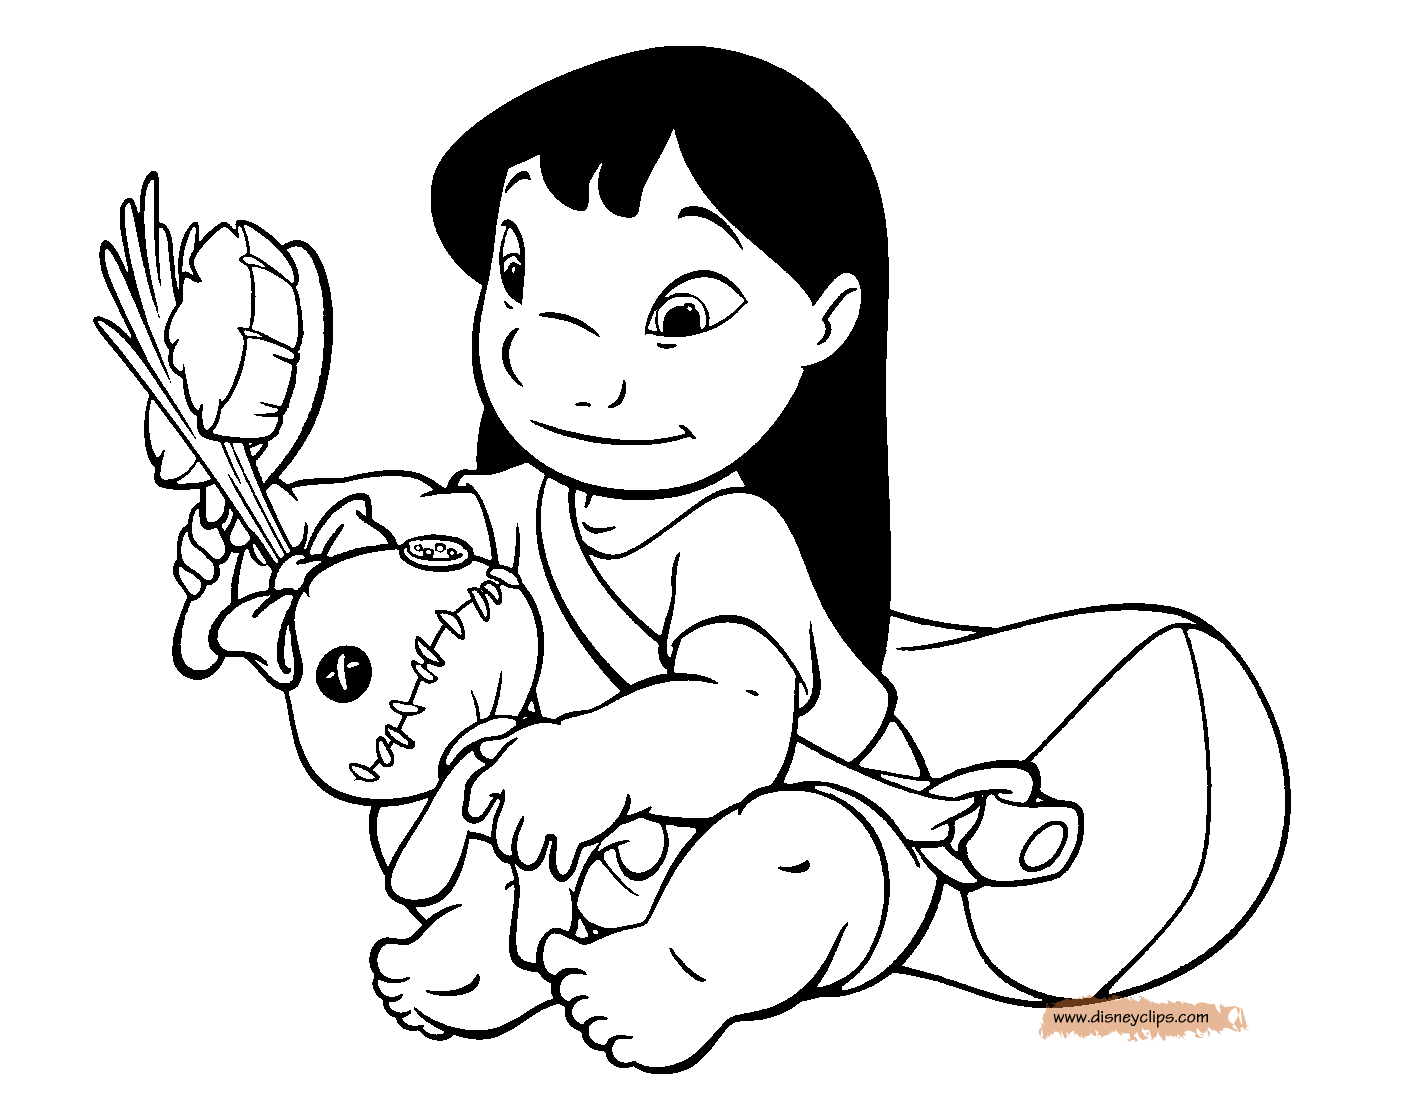 Download Lilo and Stitch Printable Coloring Pages | Disney Coloring ...